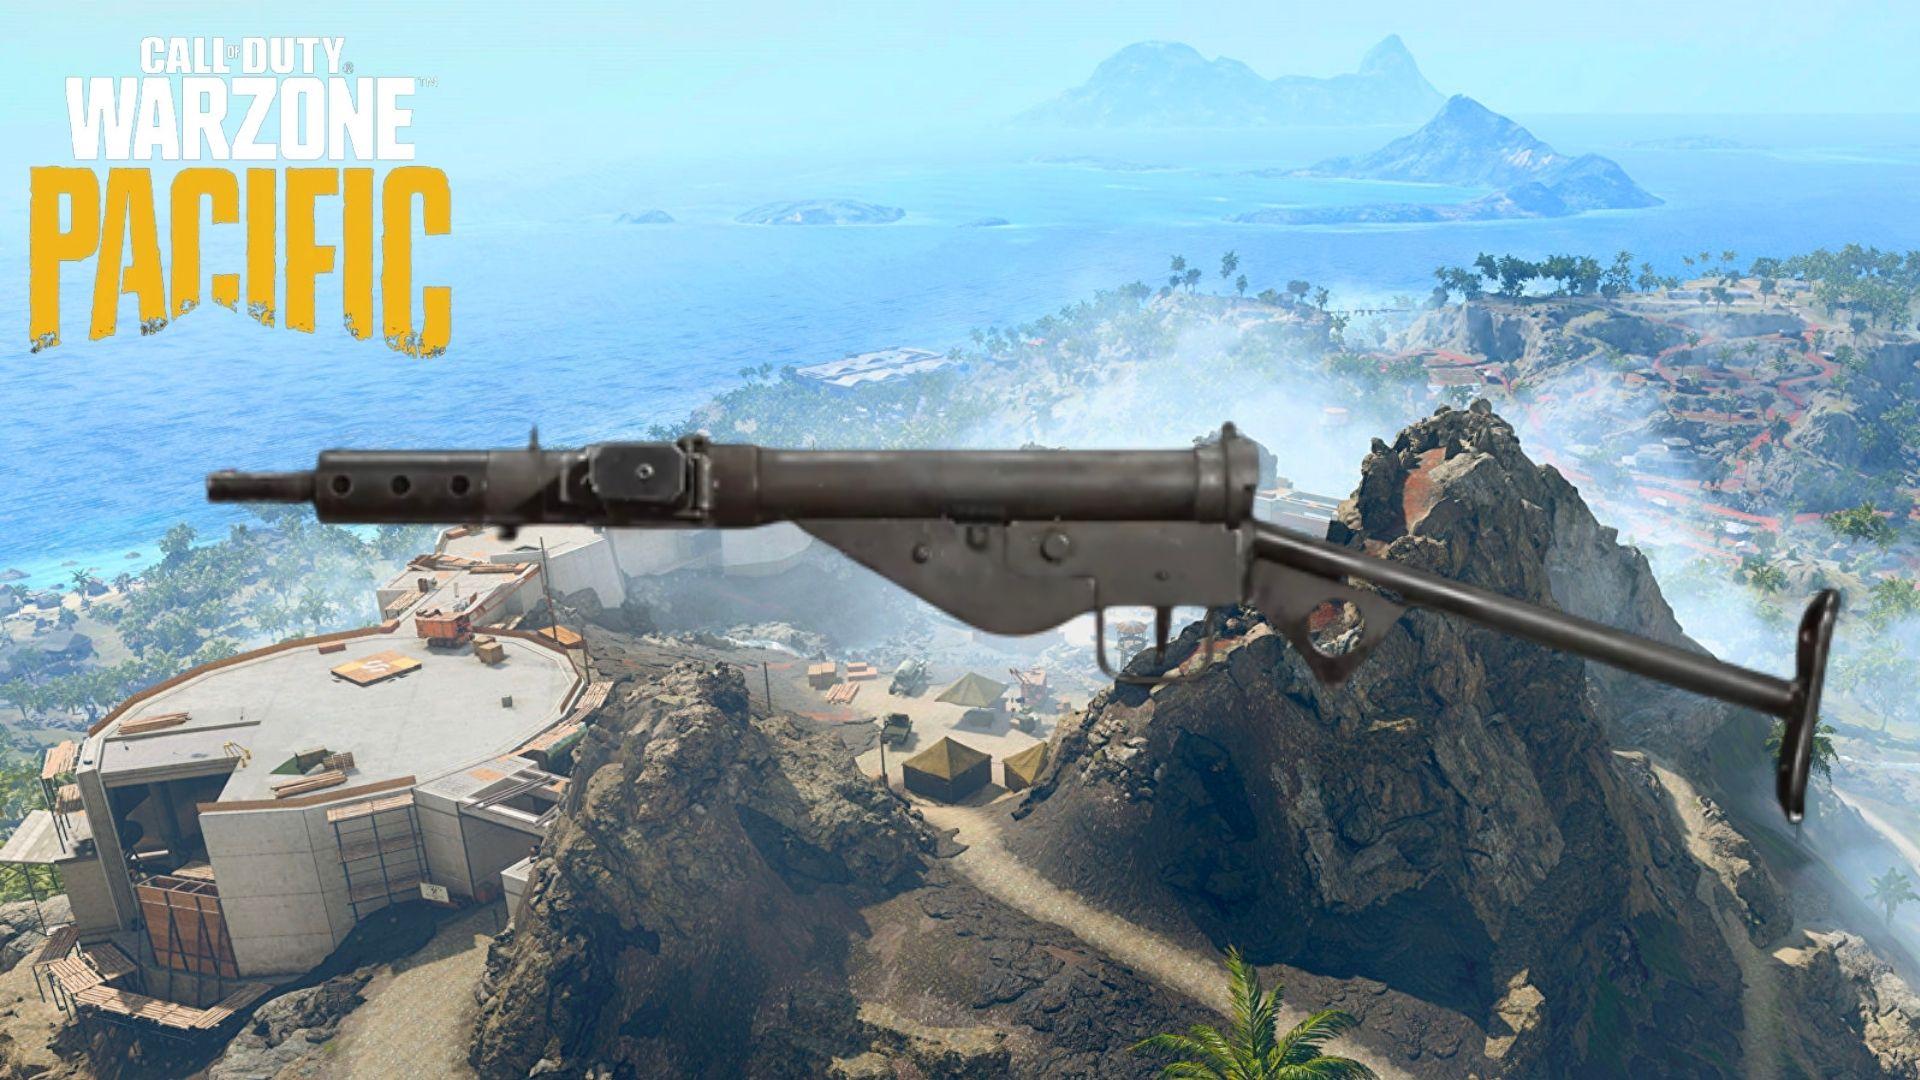 Sten SMG in Warzone Pacific Caldera map with logo